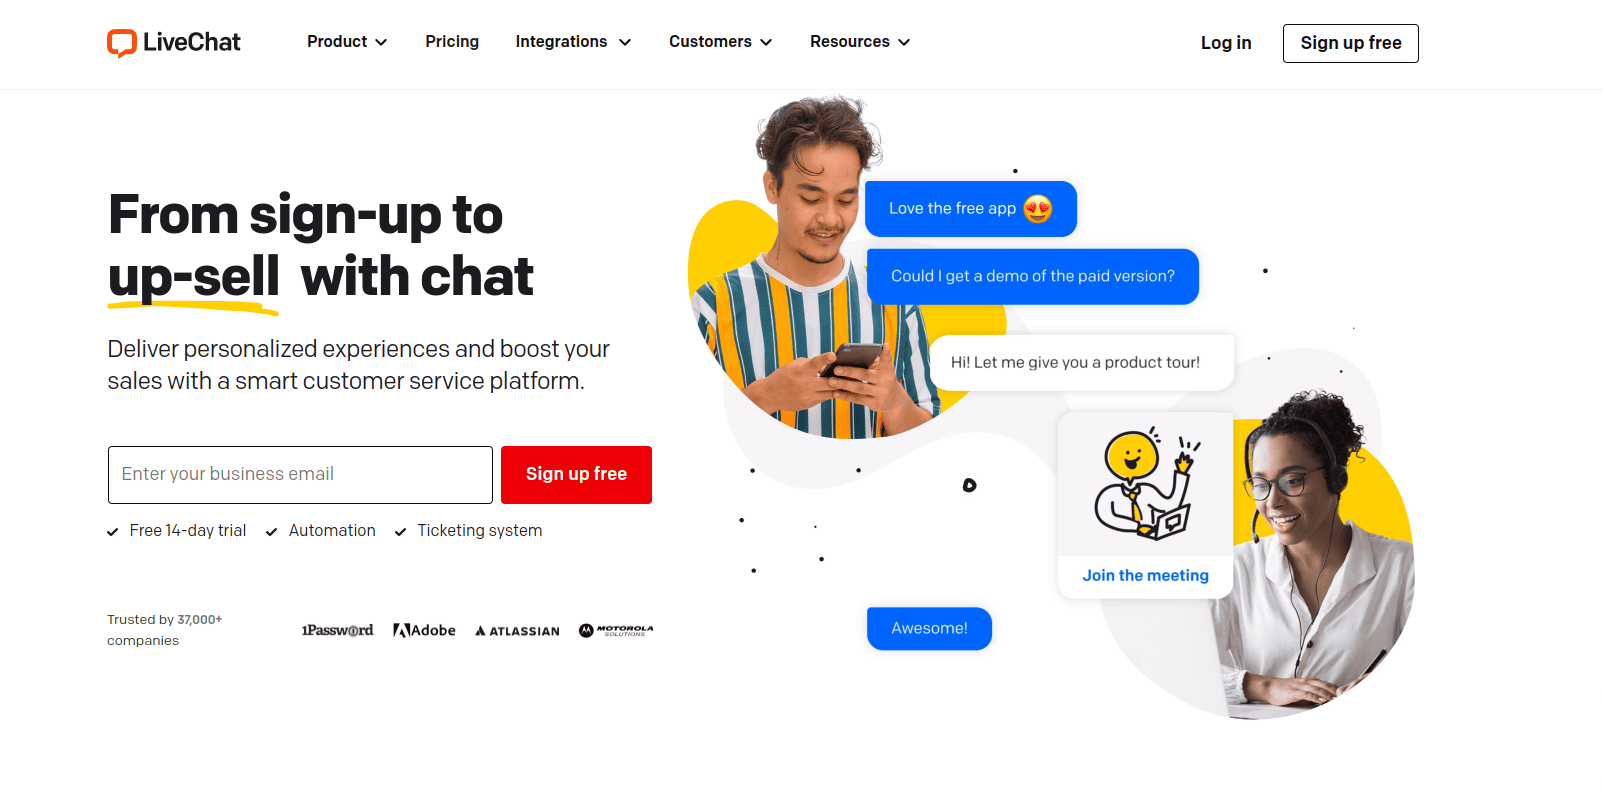 LiveChat customer service tool